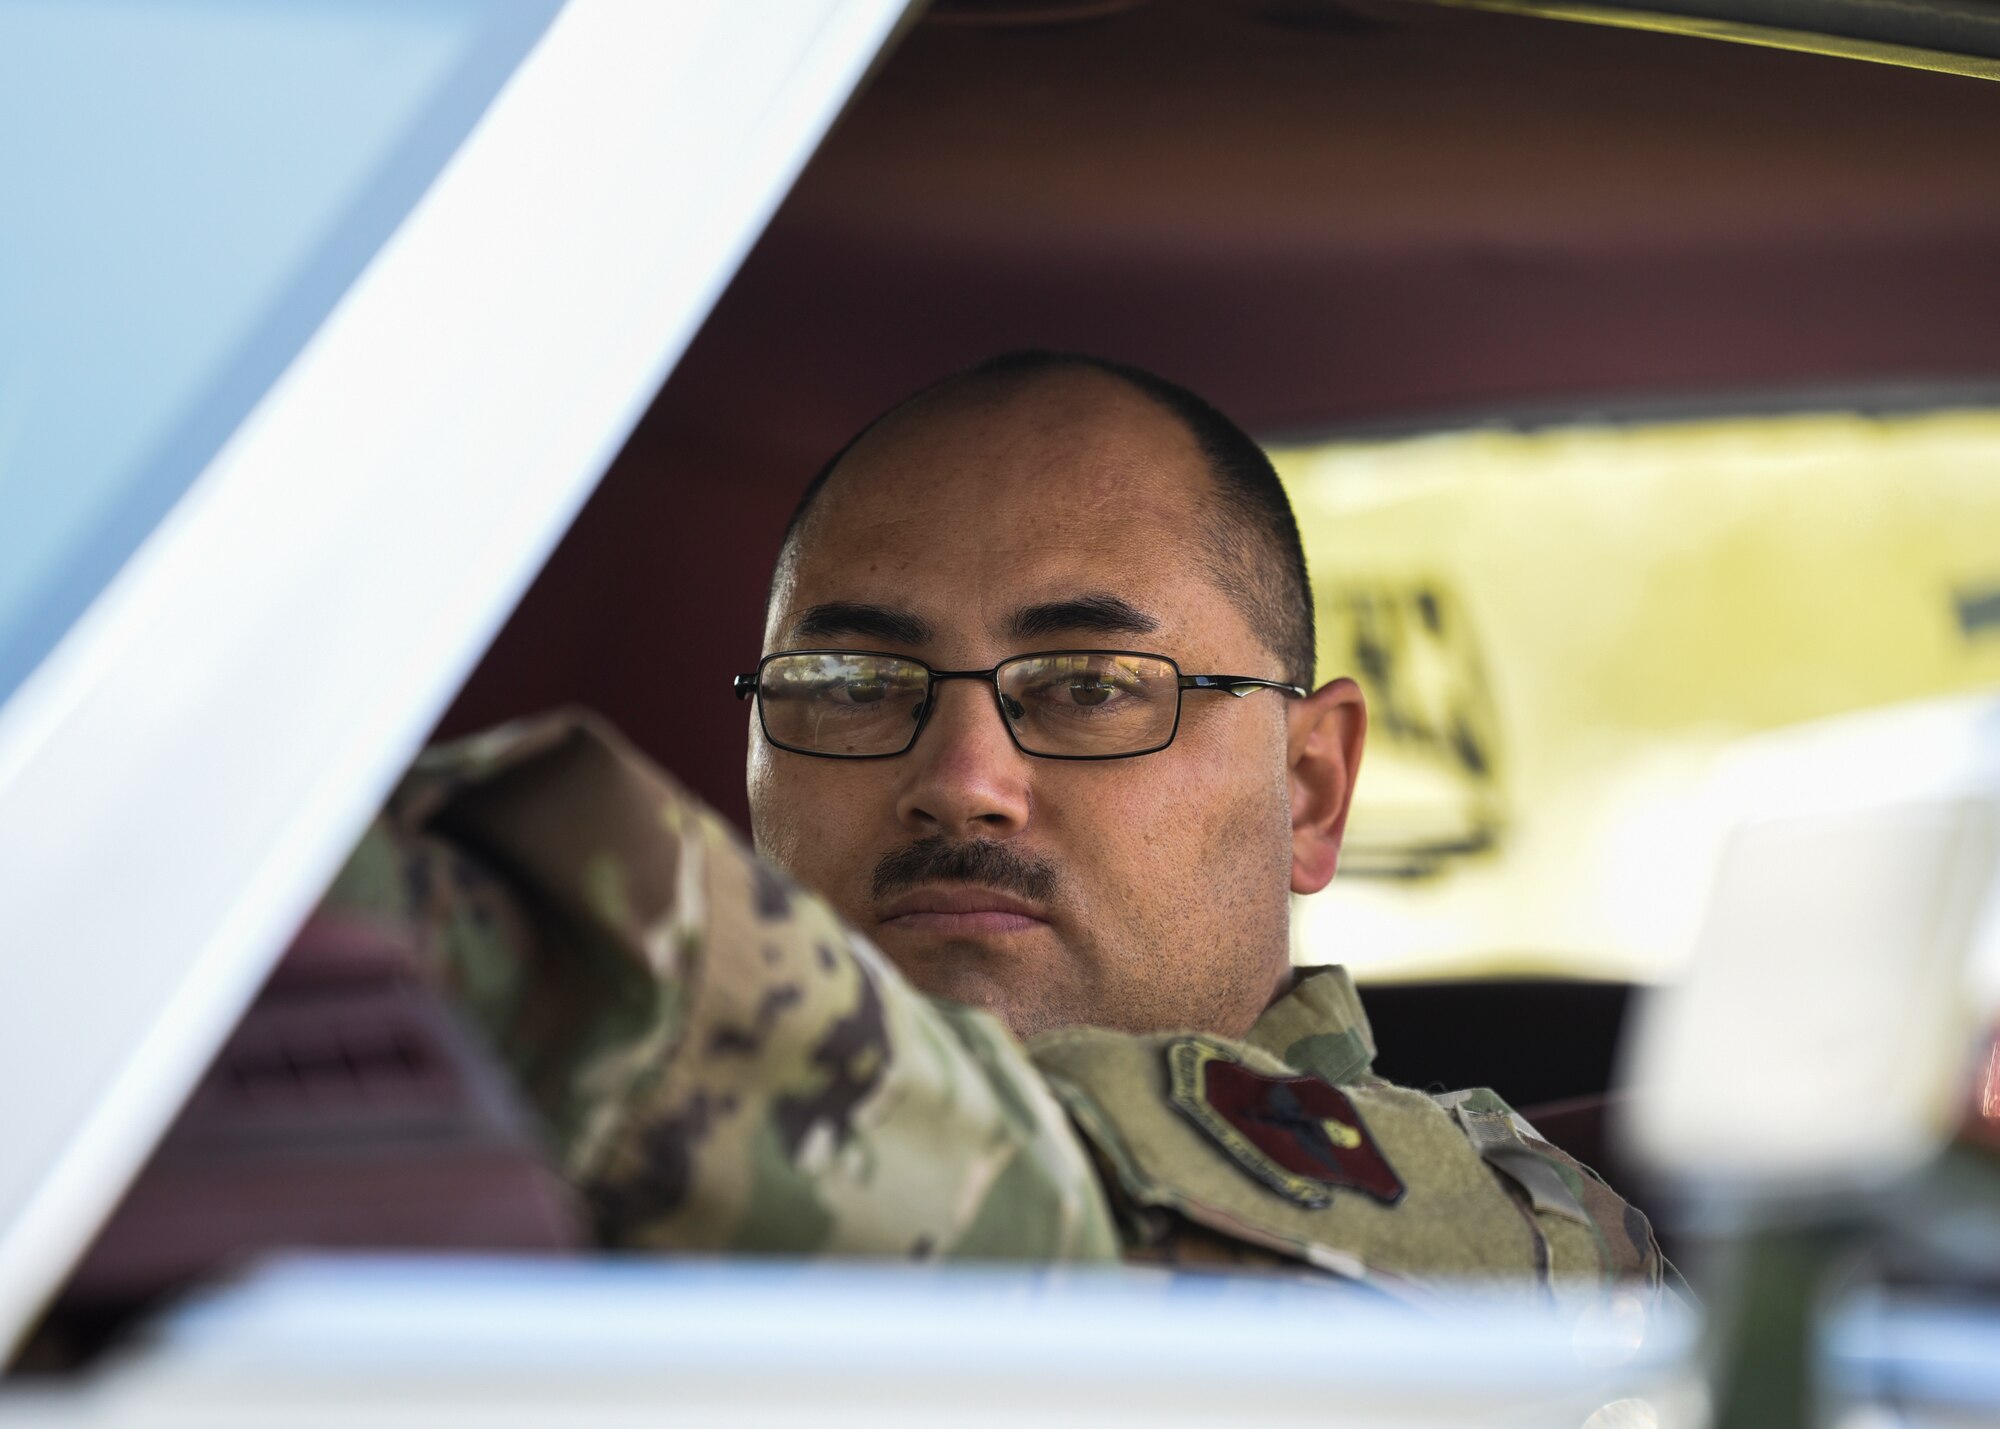 Airman poses in a car for car show.